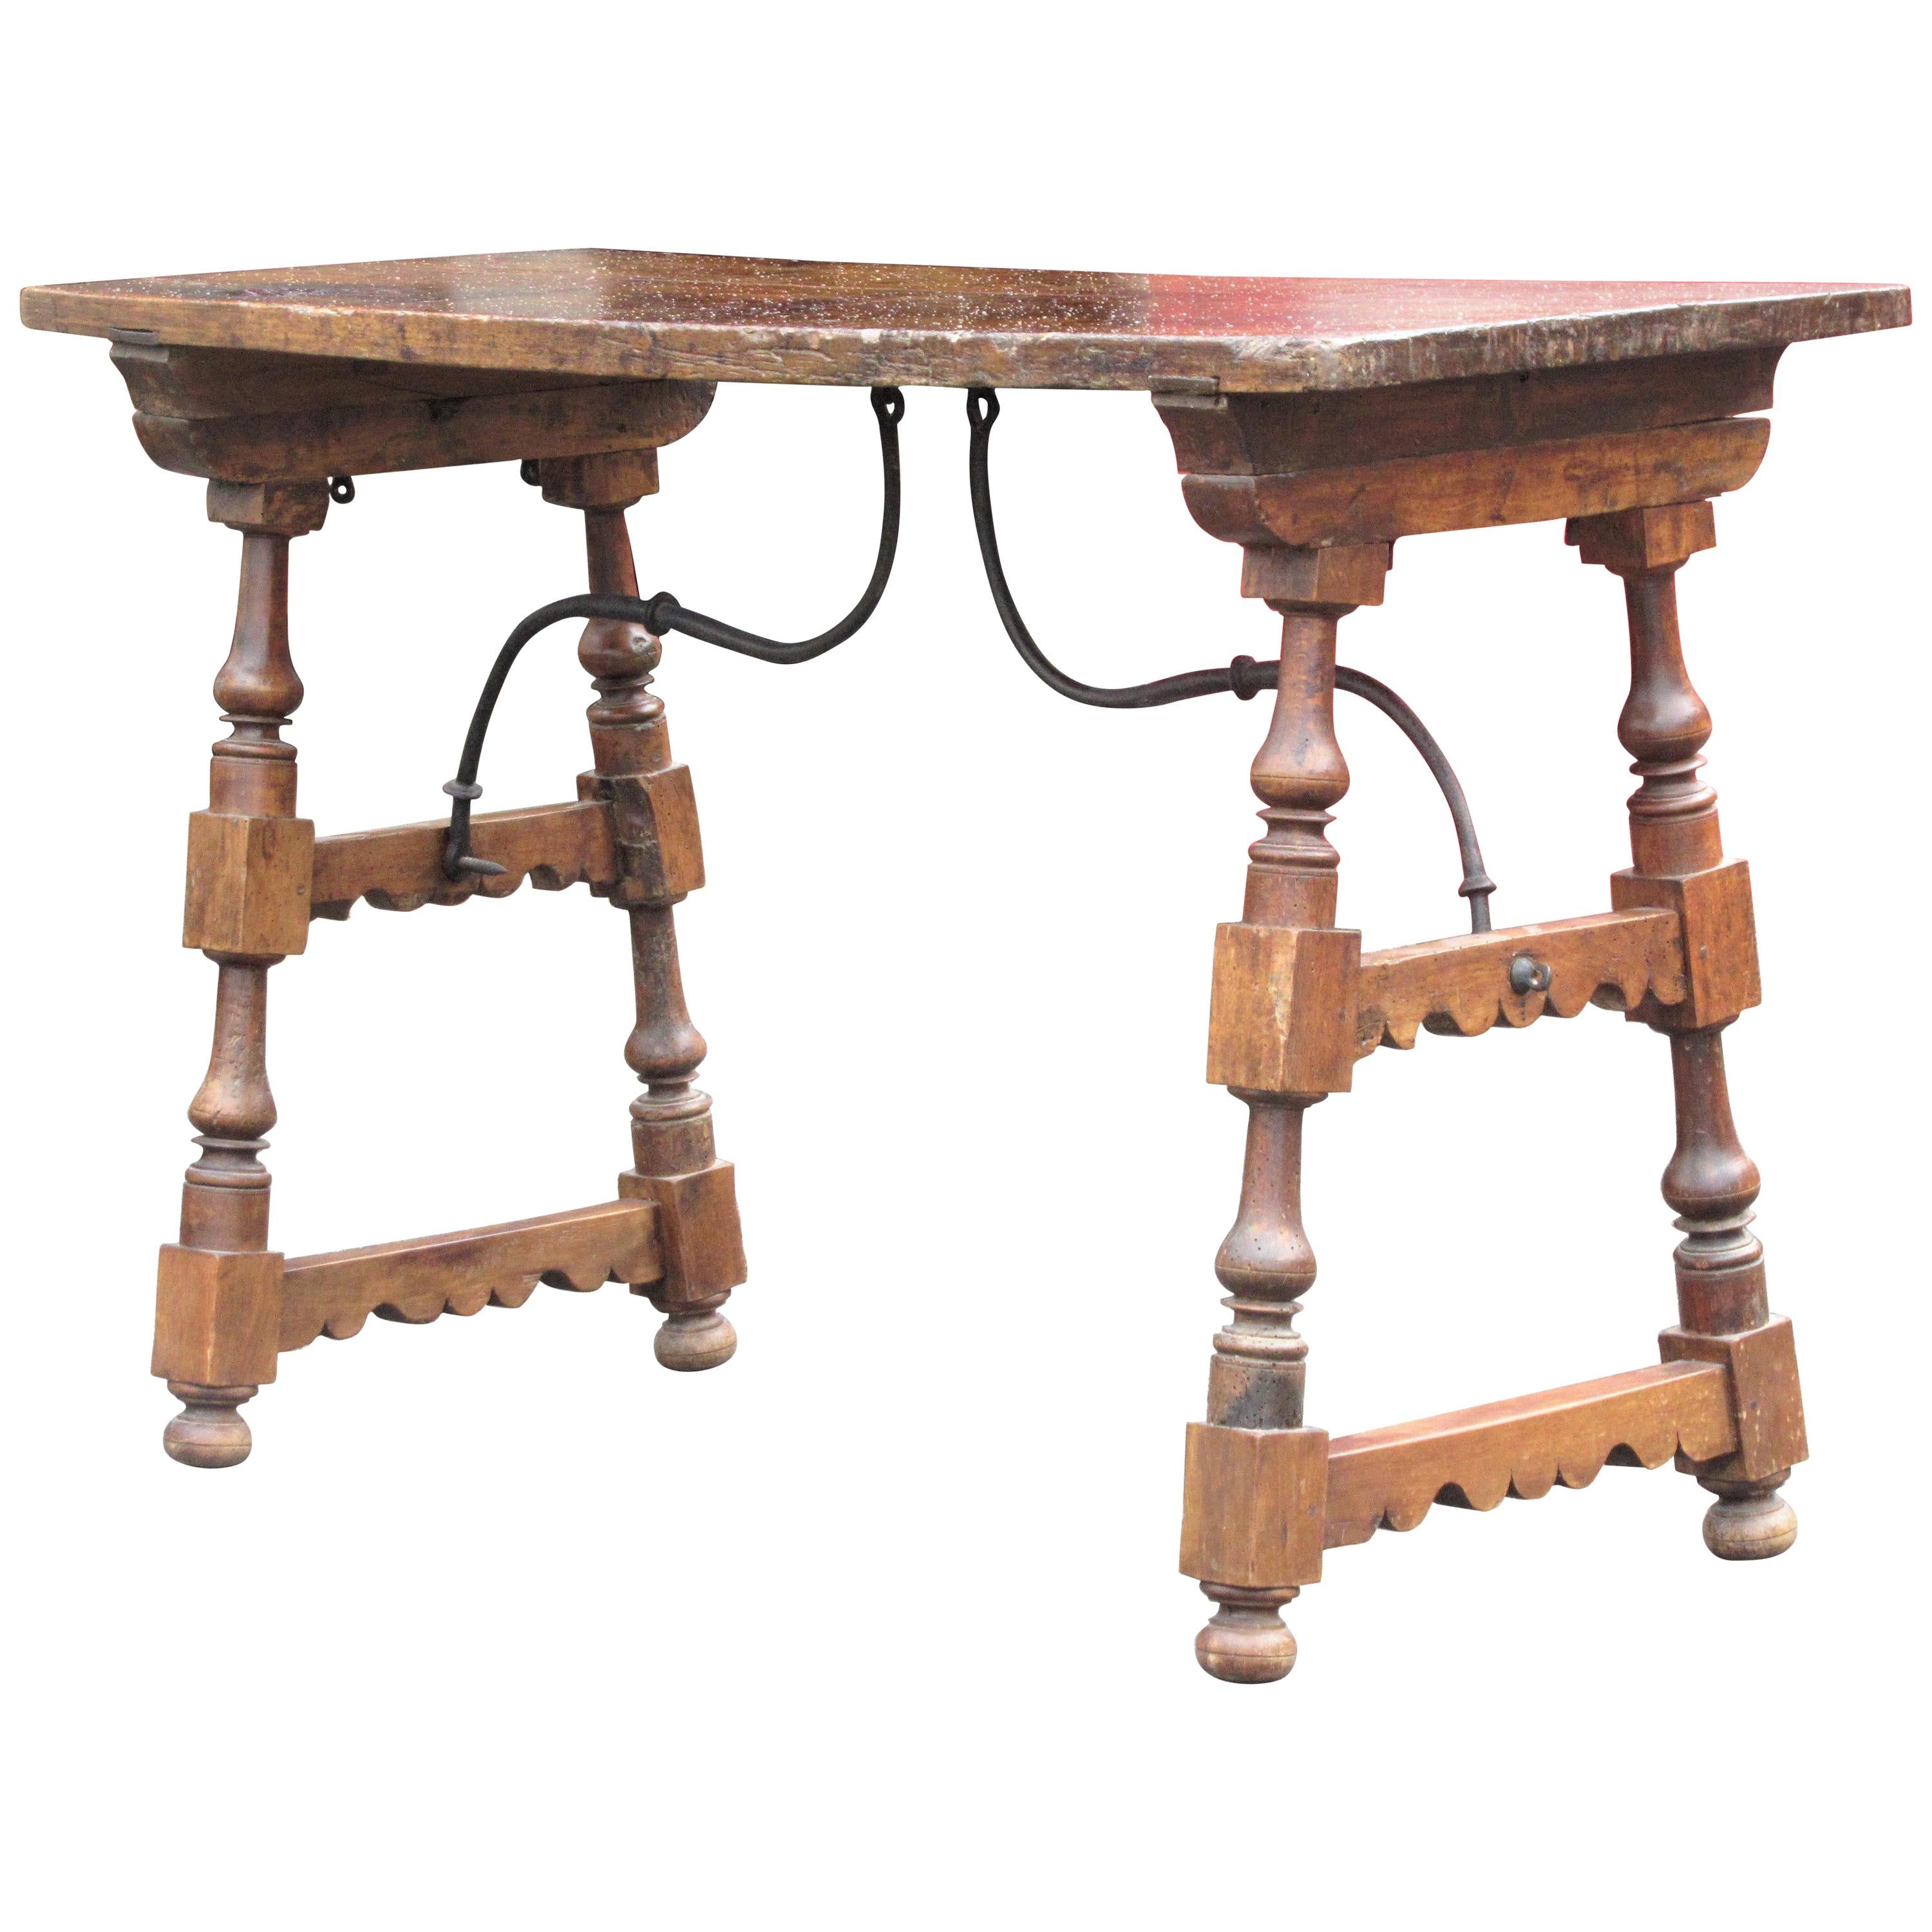 Early Antique Spanish Baroque Walnut Table